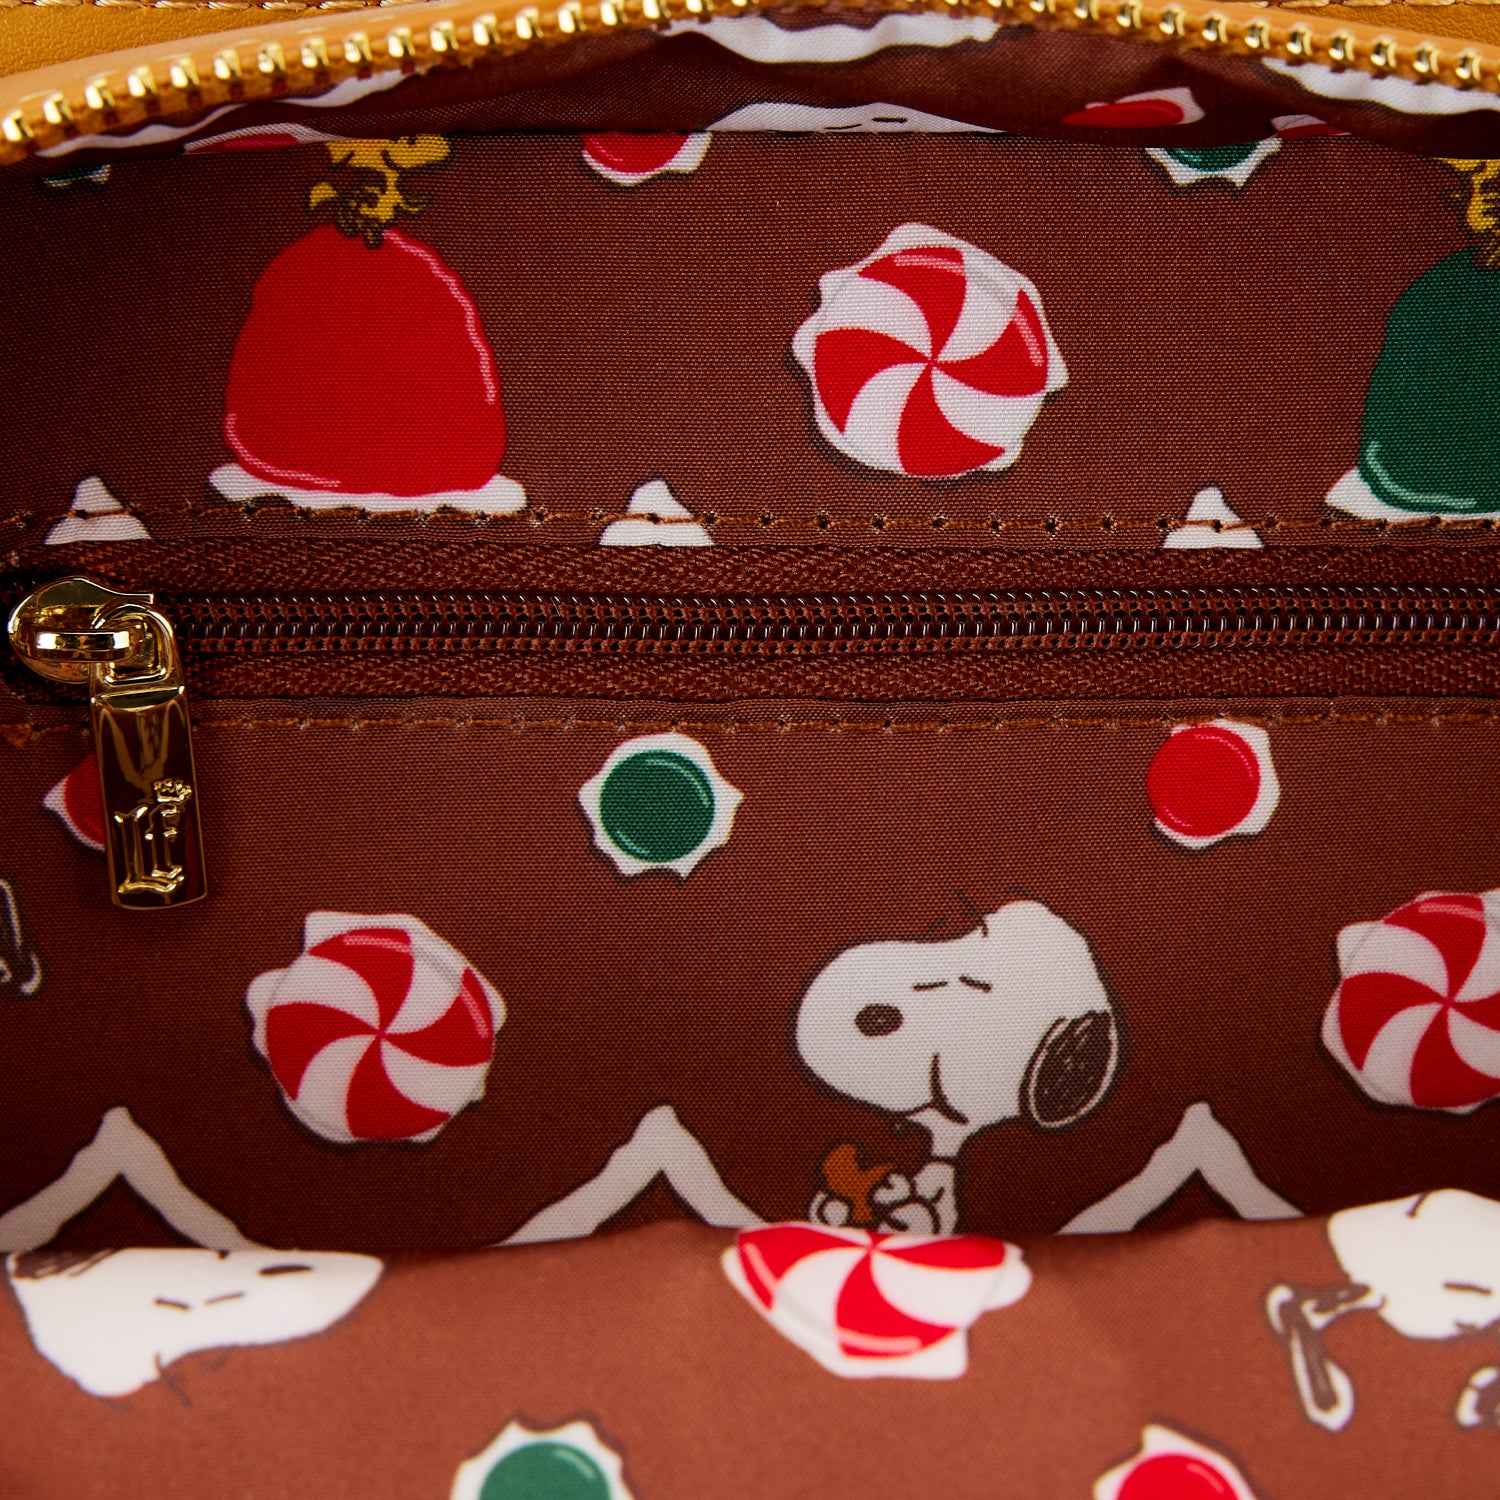 Loungefly Peanuts Snoopy Gingerbread House Figural Crossbody - *PREORDER*